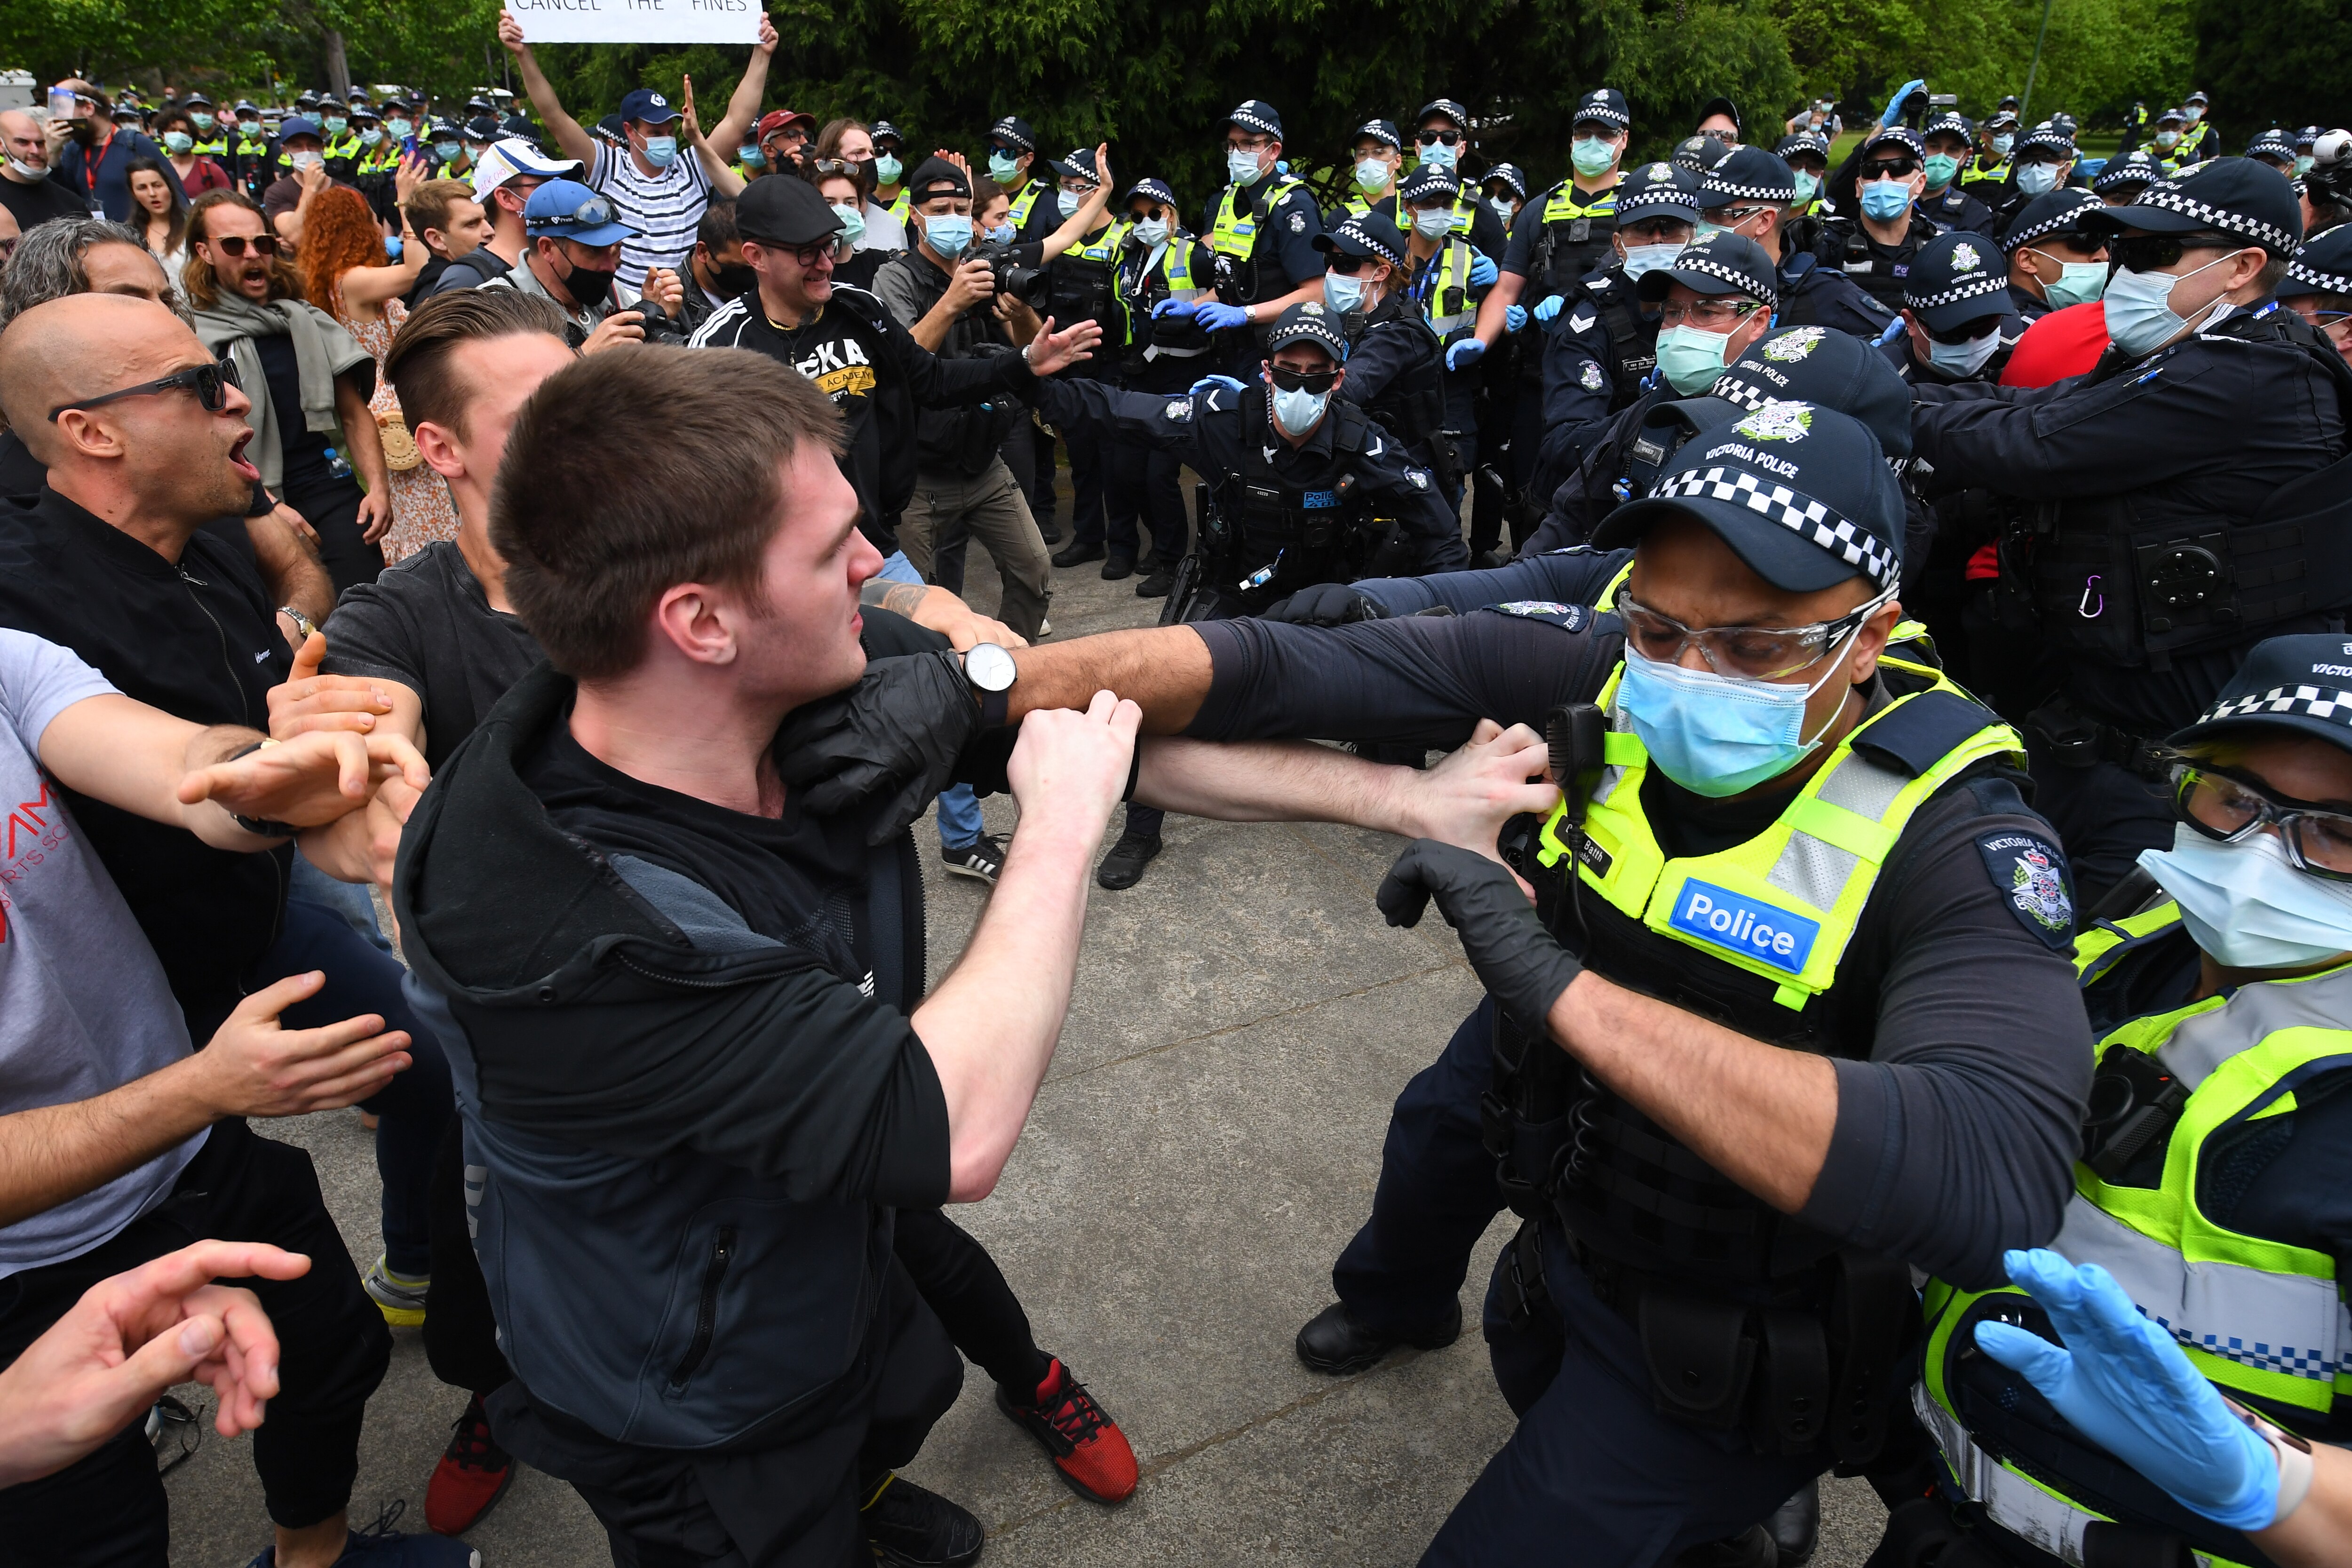 Protesters are seen during an anti-lockdown protest in Melbourne on 23 October.